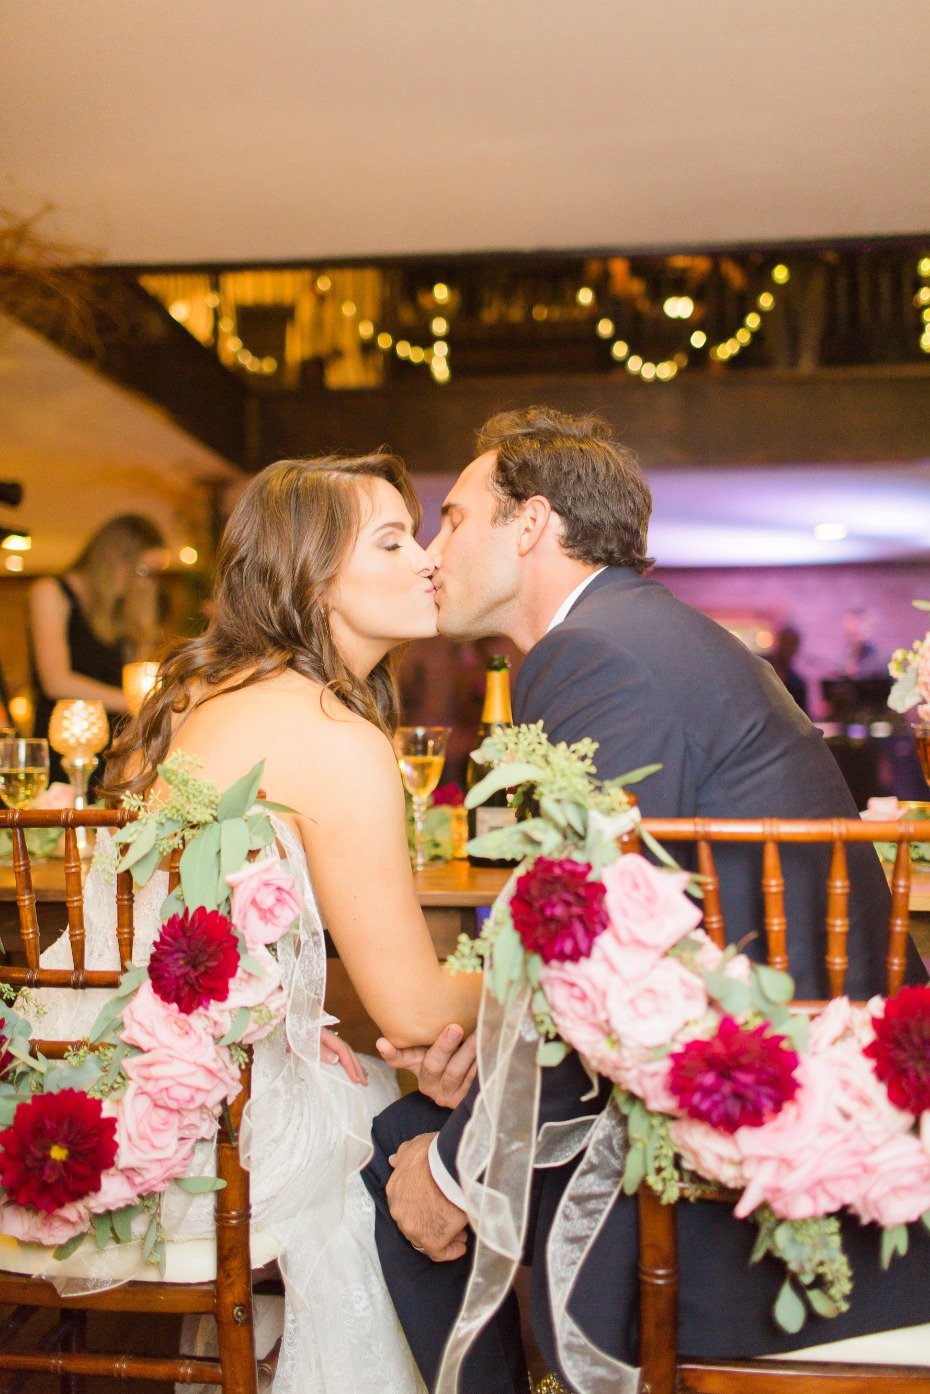 wedding kiss from the newlyweds at their sweetheart table